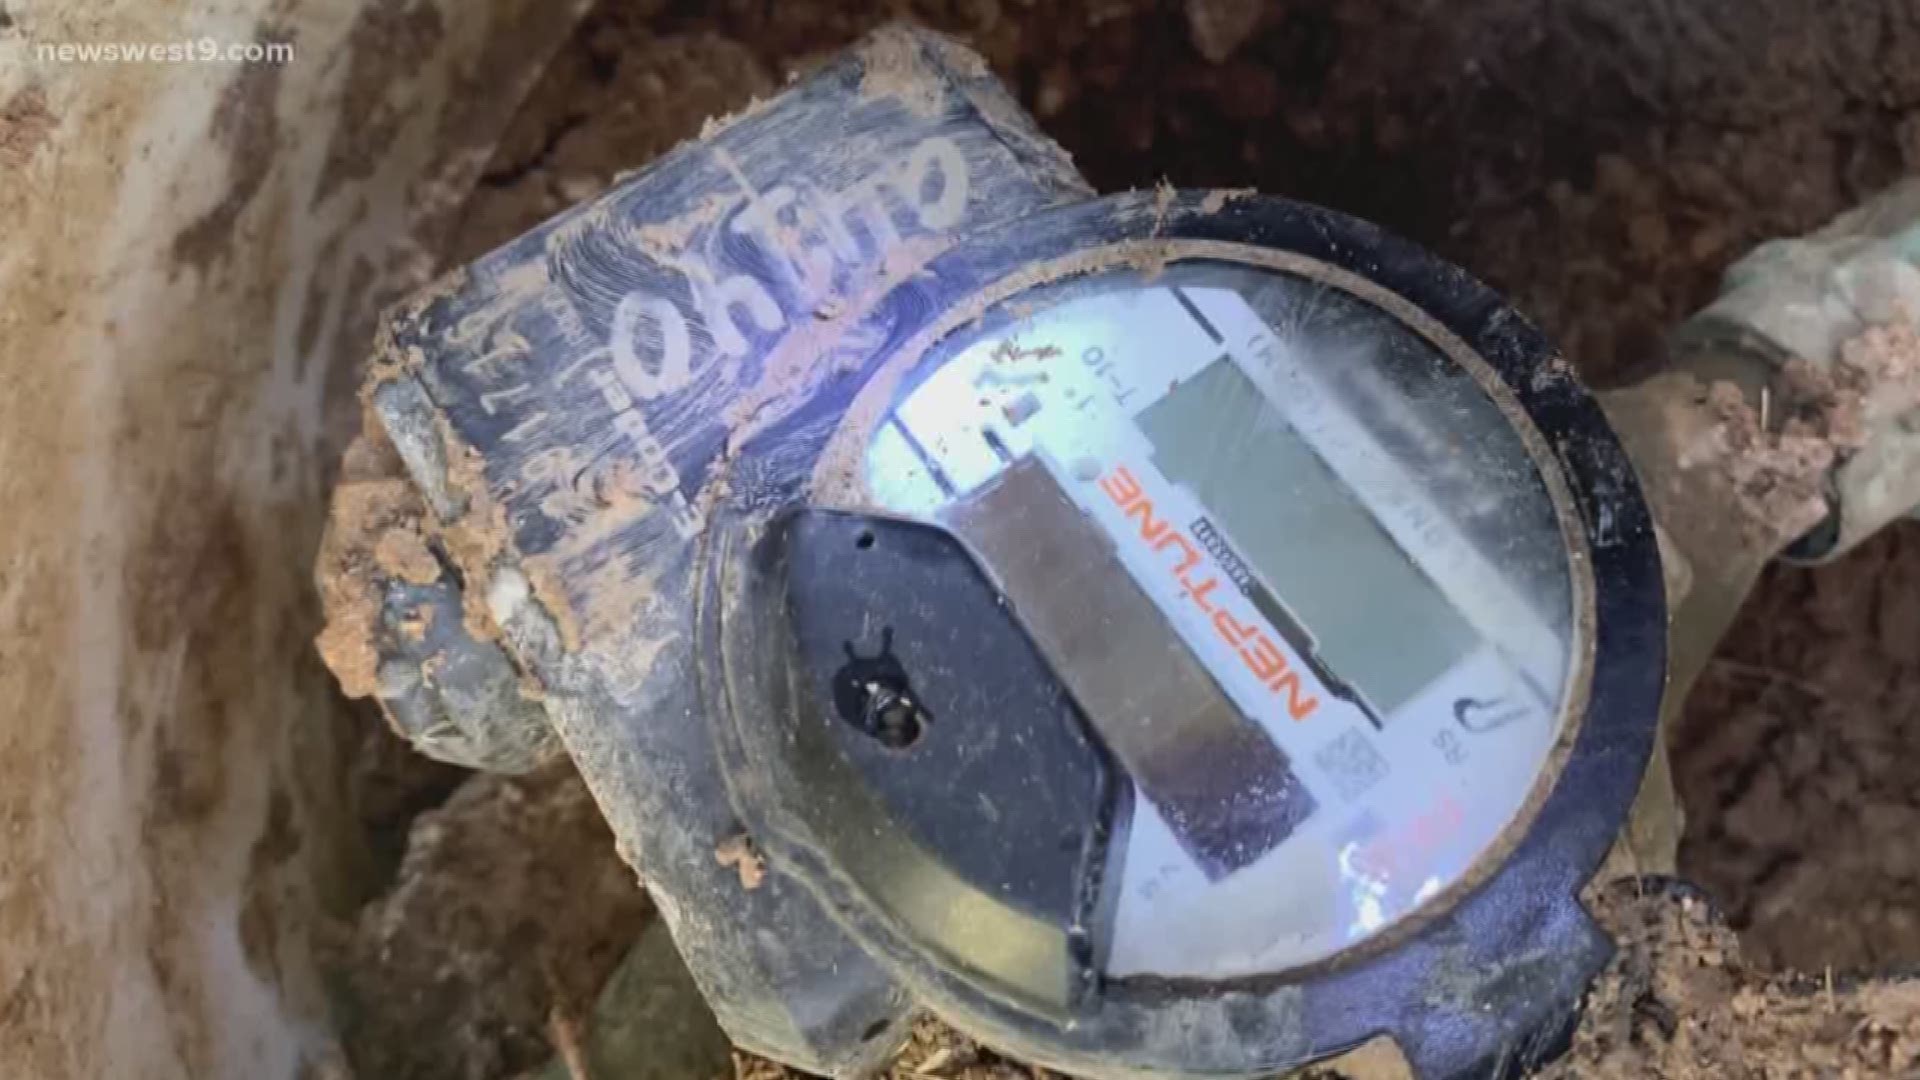 Midland is set to replace all of the old water meters in the city by next year.